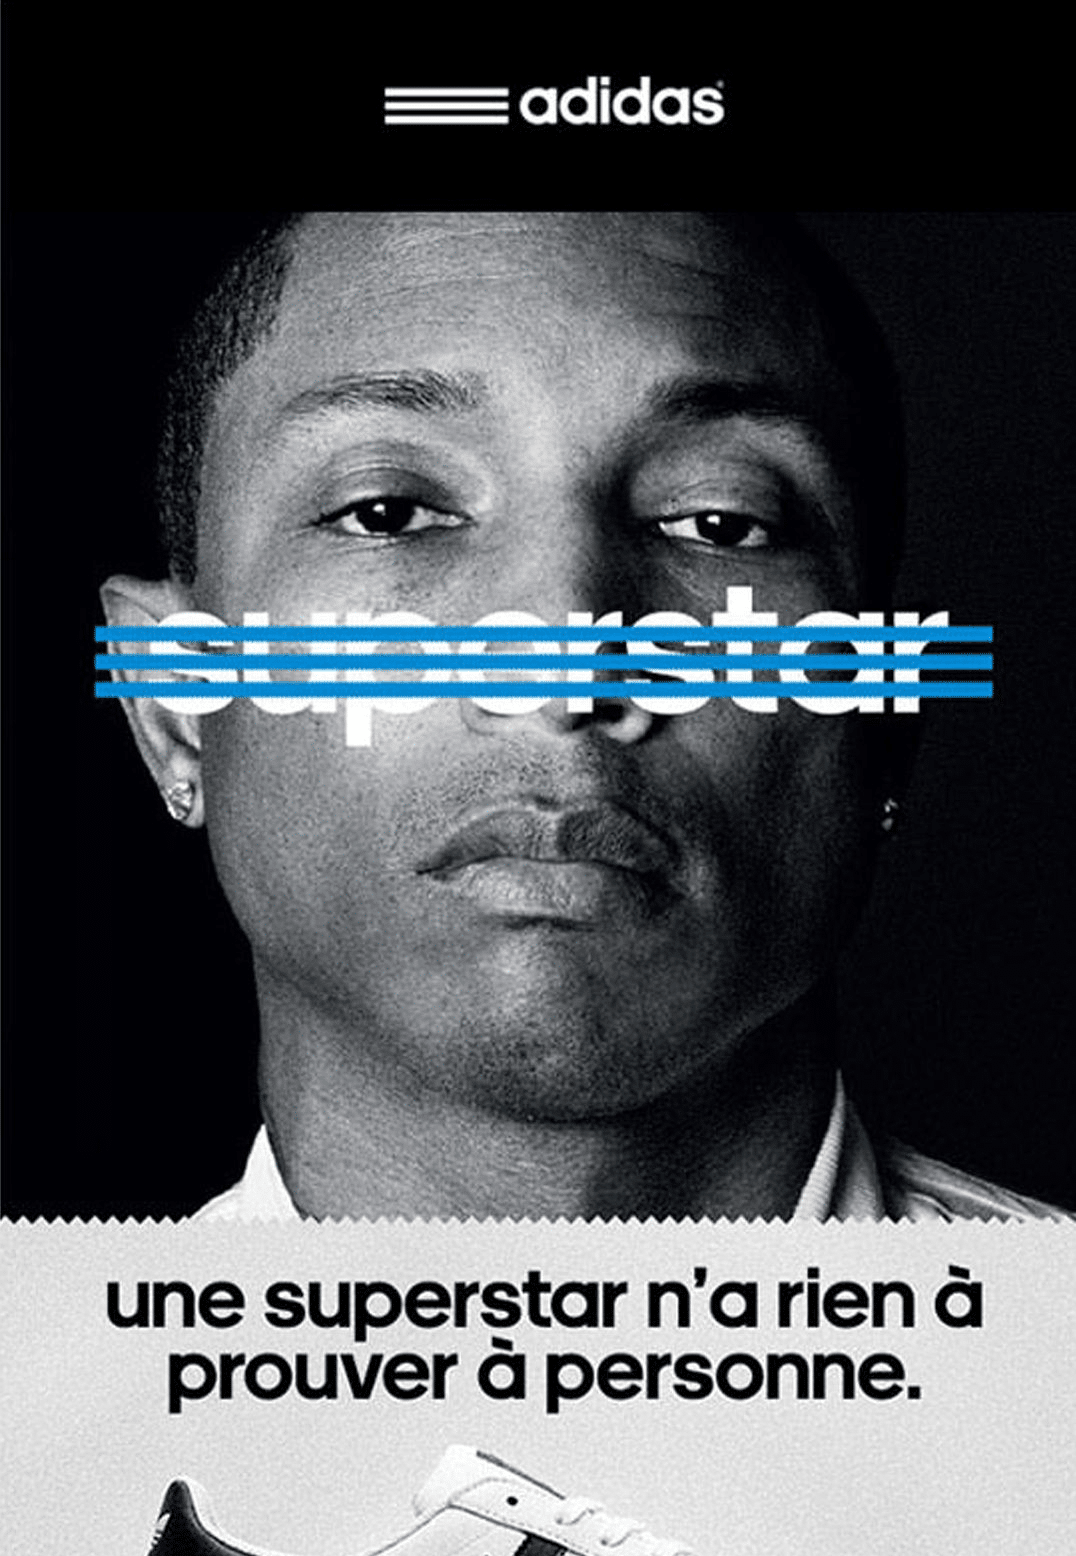 This is a localized Adidas campaign written in French, featuring Pharrell Williams. This ad is a good example of demographic localization.